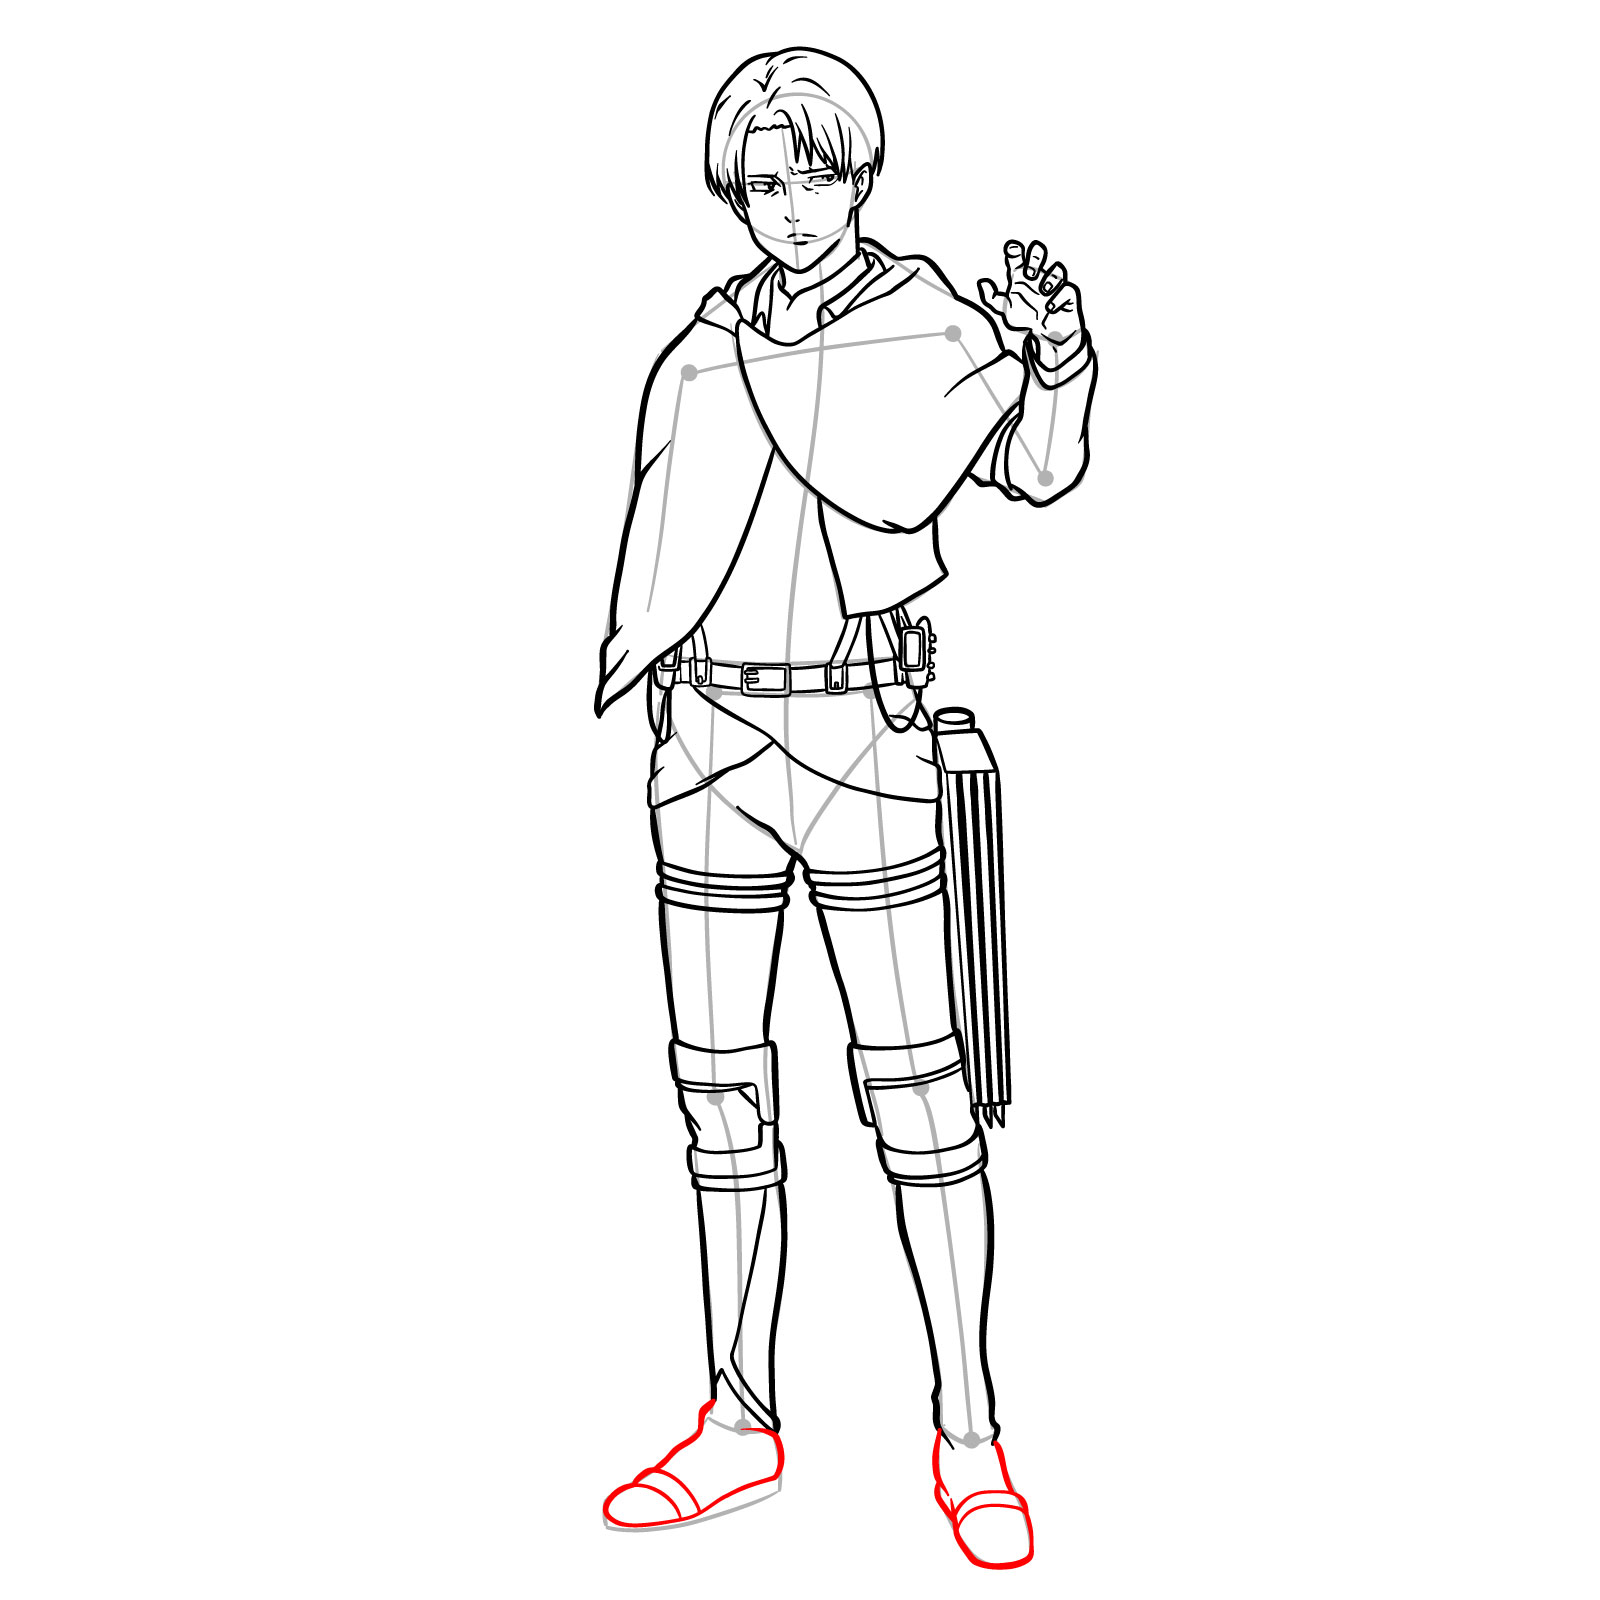 Step-by-step drawing of Levi Ackerman's legs and boots with detailed straps and soles - step 24